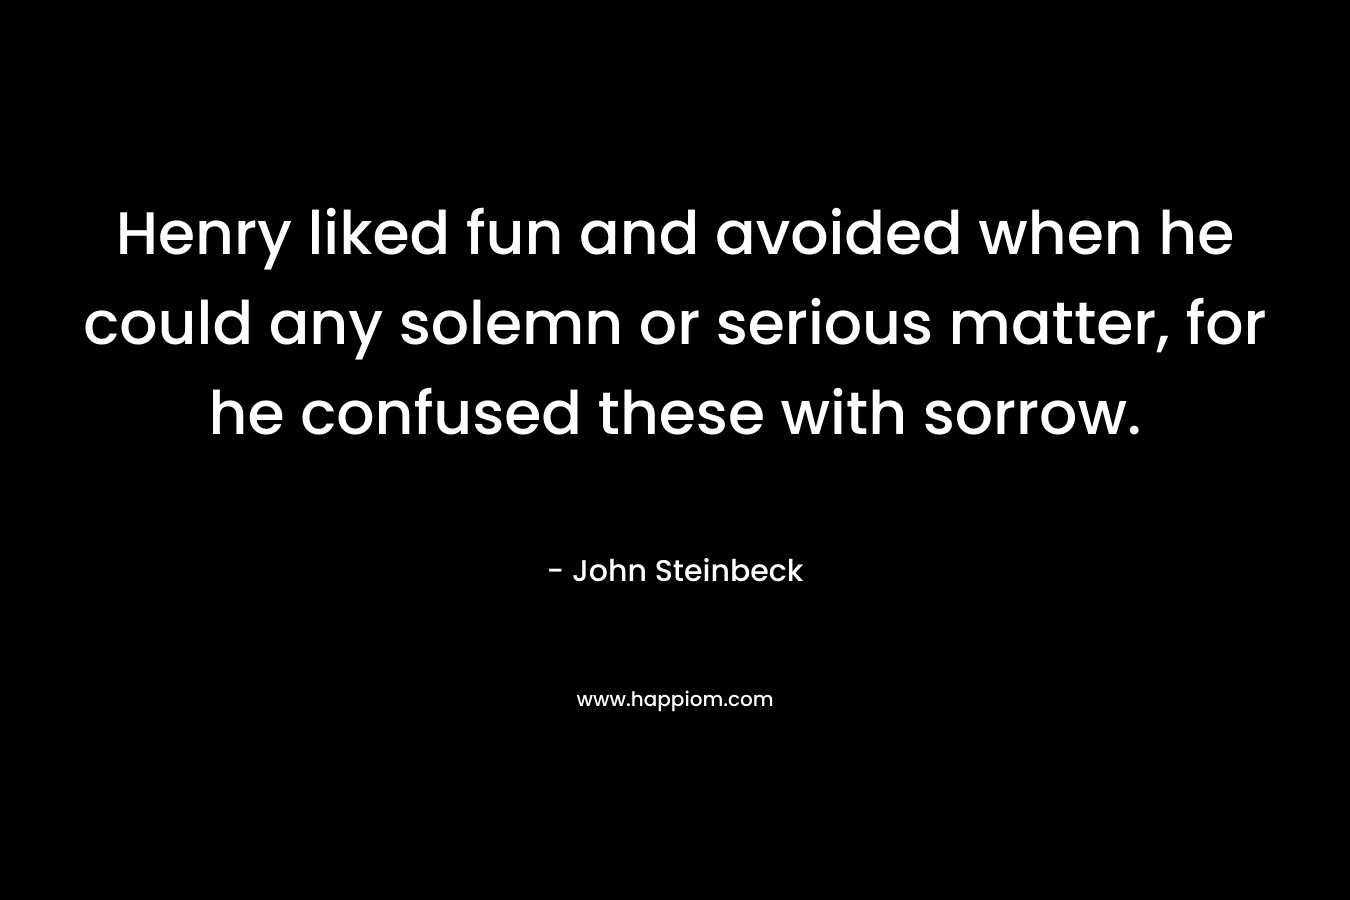 Henry liked fun and avoided when he could any solemn or serious matter, for he confused these with sorrow. – John Steinbeck